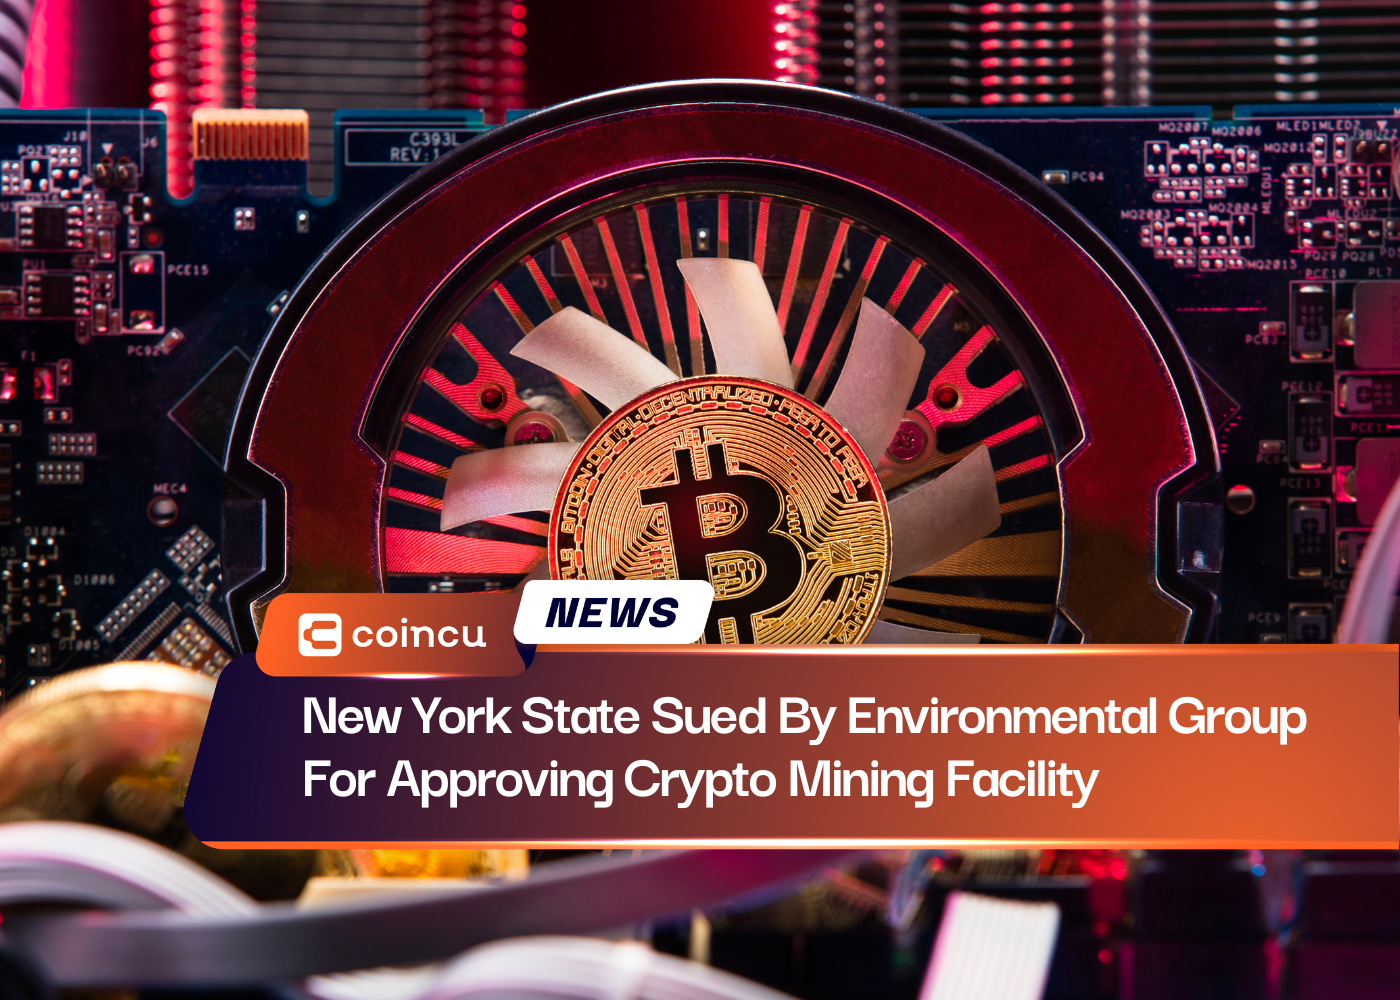 New York State Sued By Environmental Group For Approving Crypto Mining Facility